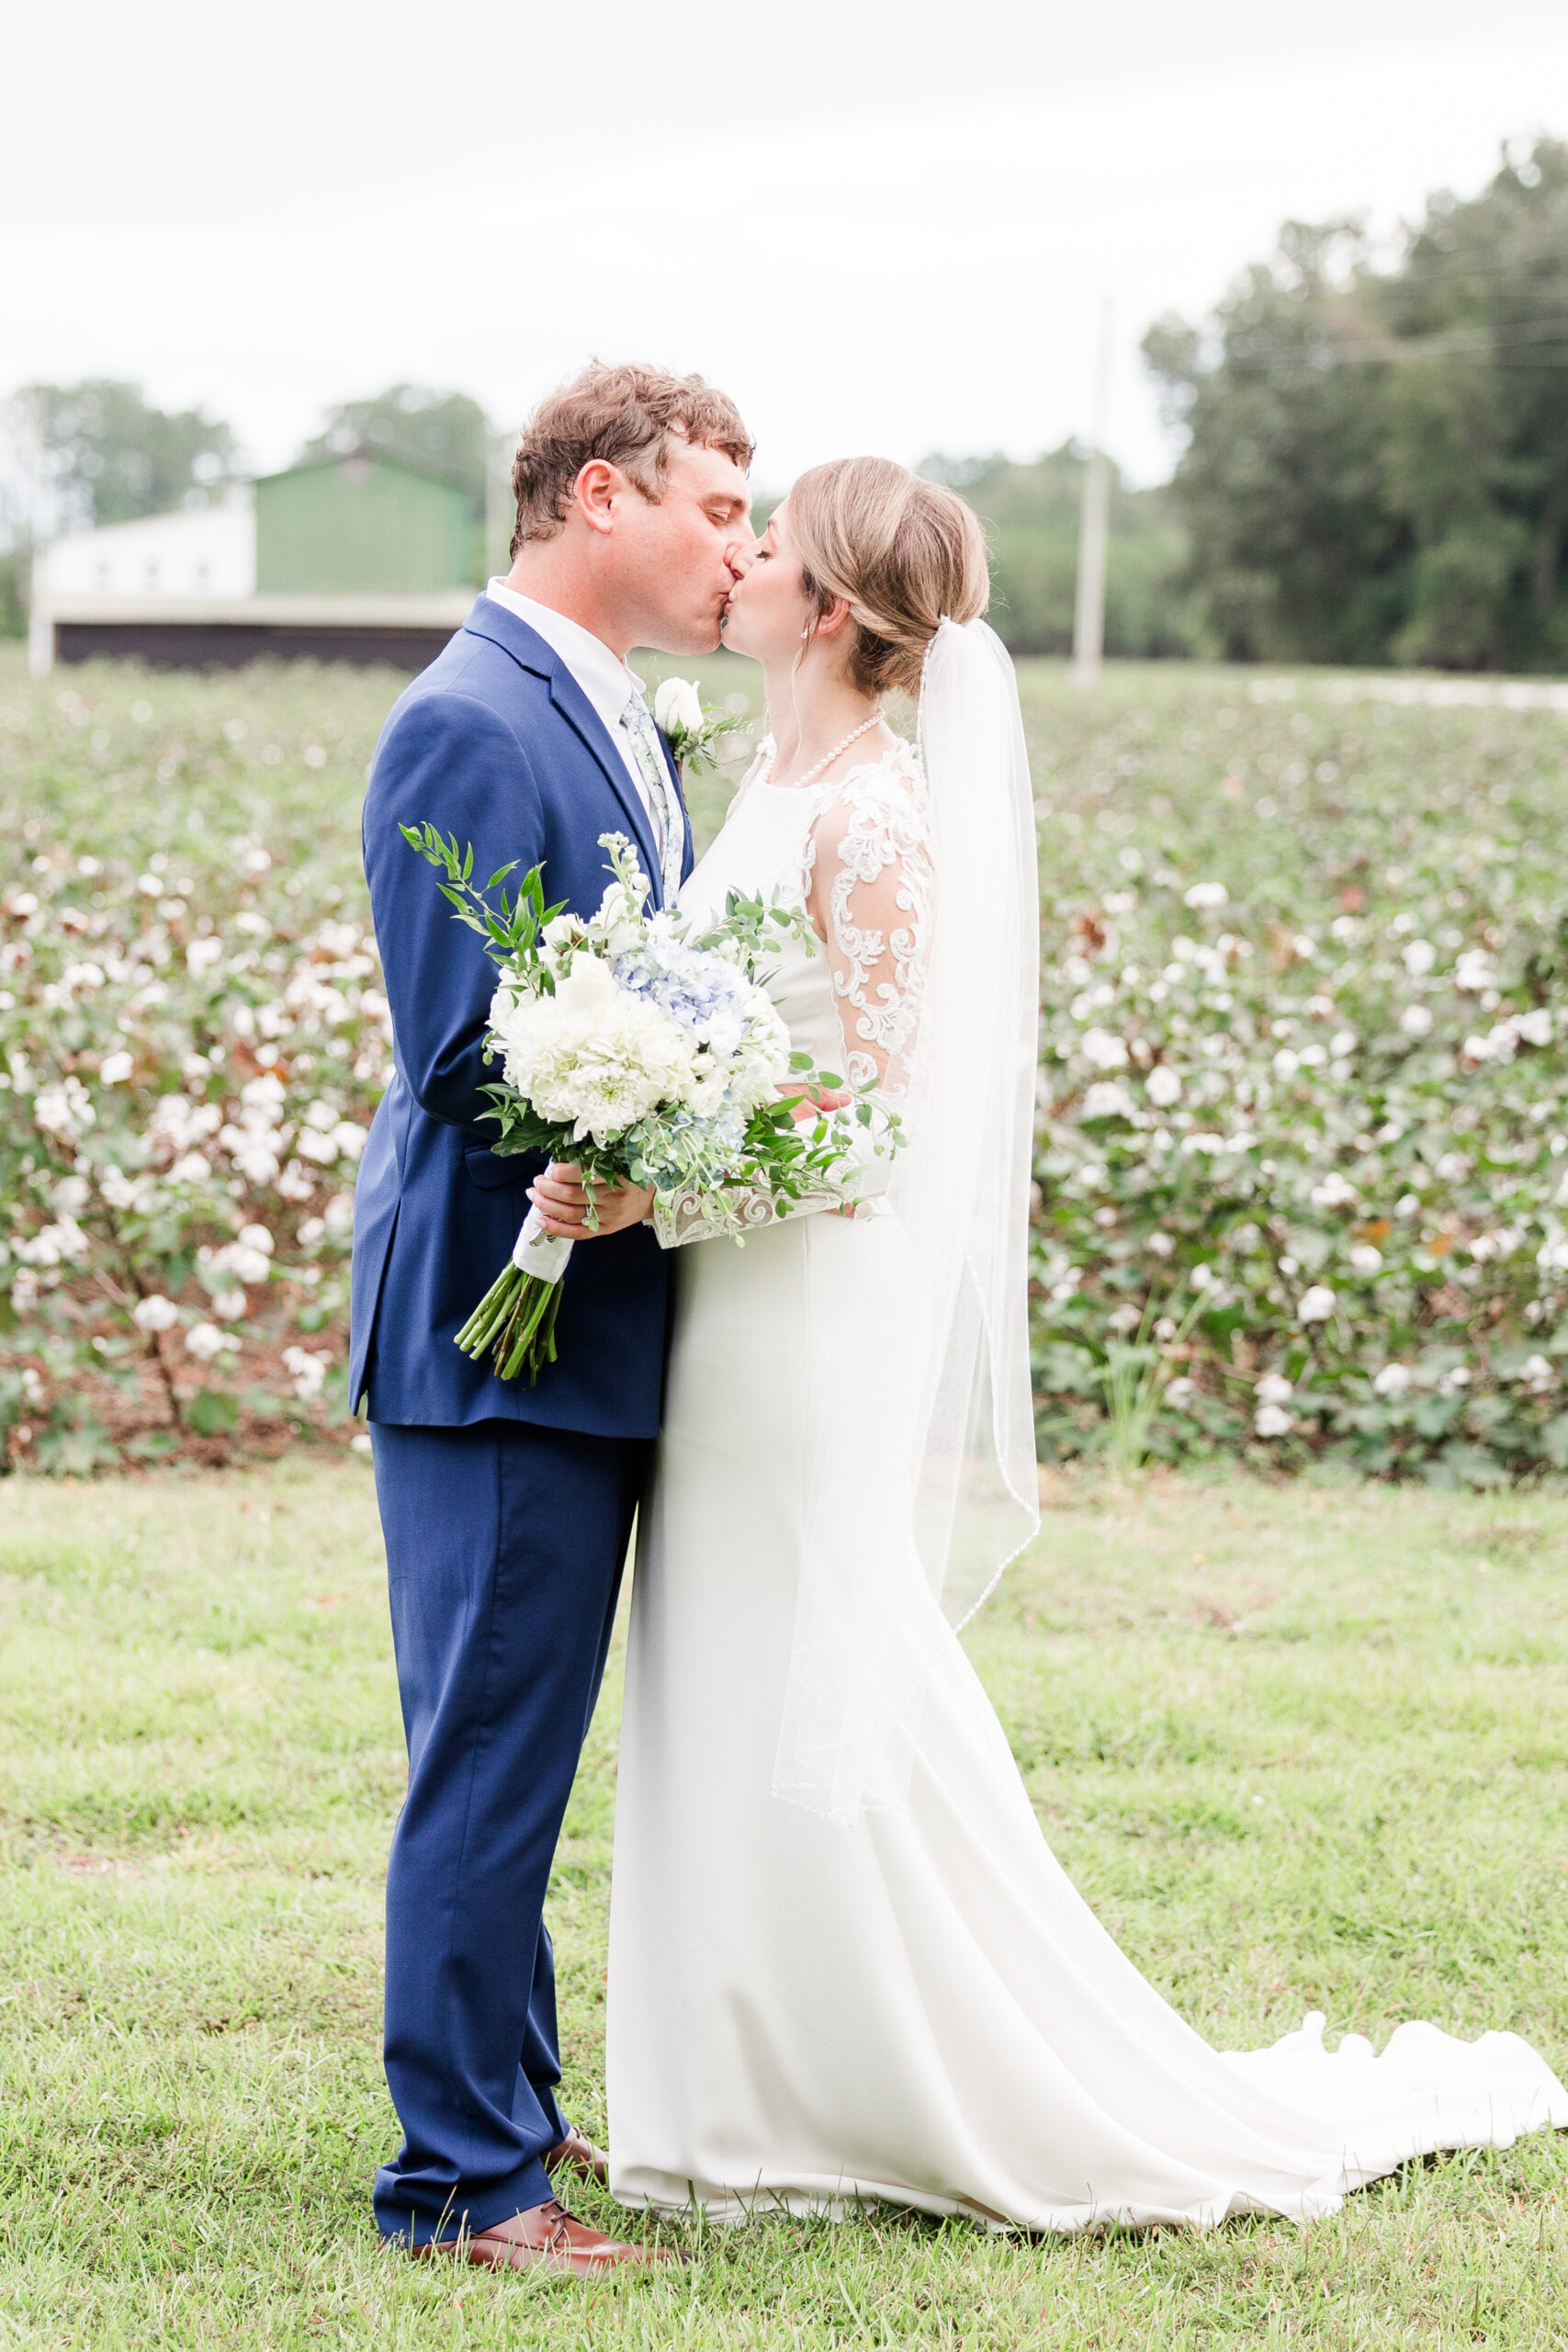 Weddings in the south - Hannah Ruth Photography with Cotton Fields